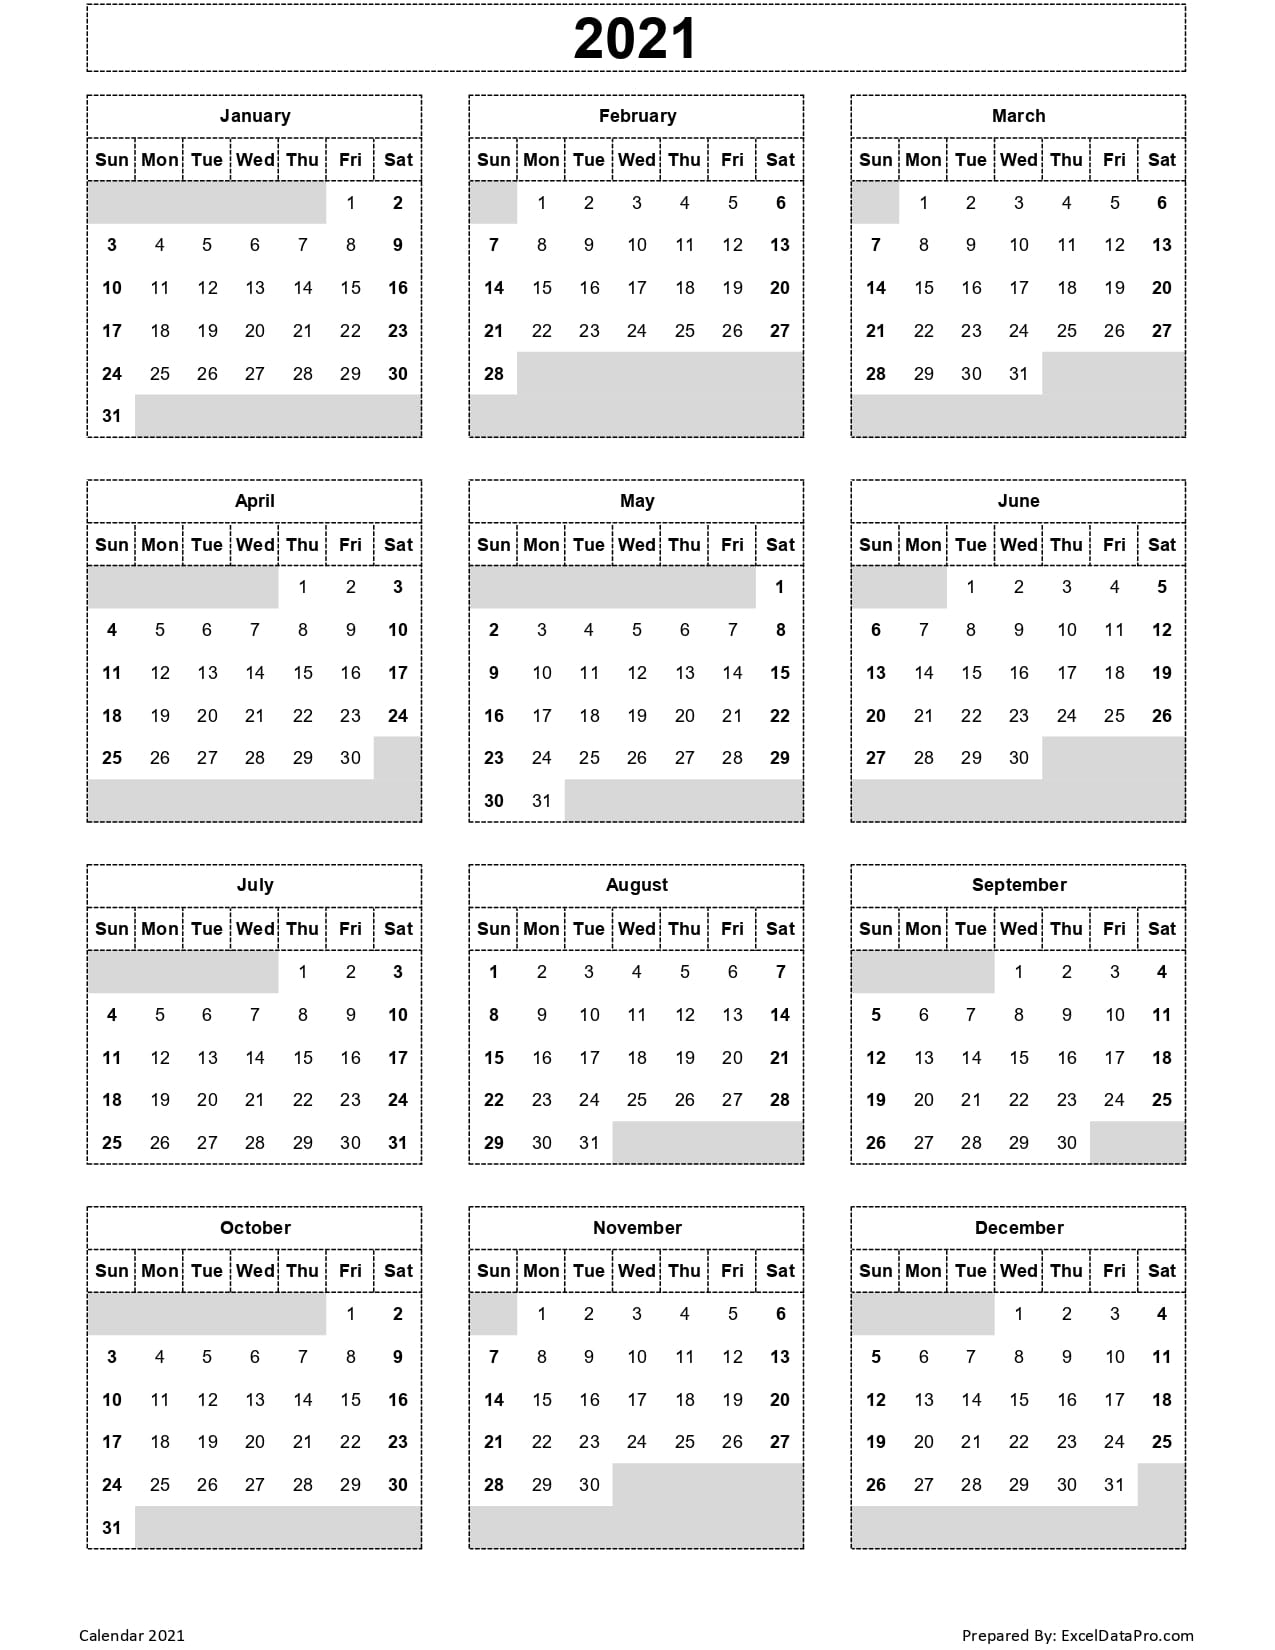 Free 2021 Yearly Calender Template : Calendar Yearly